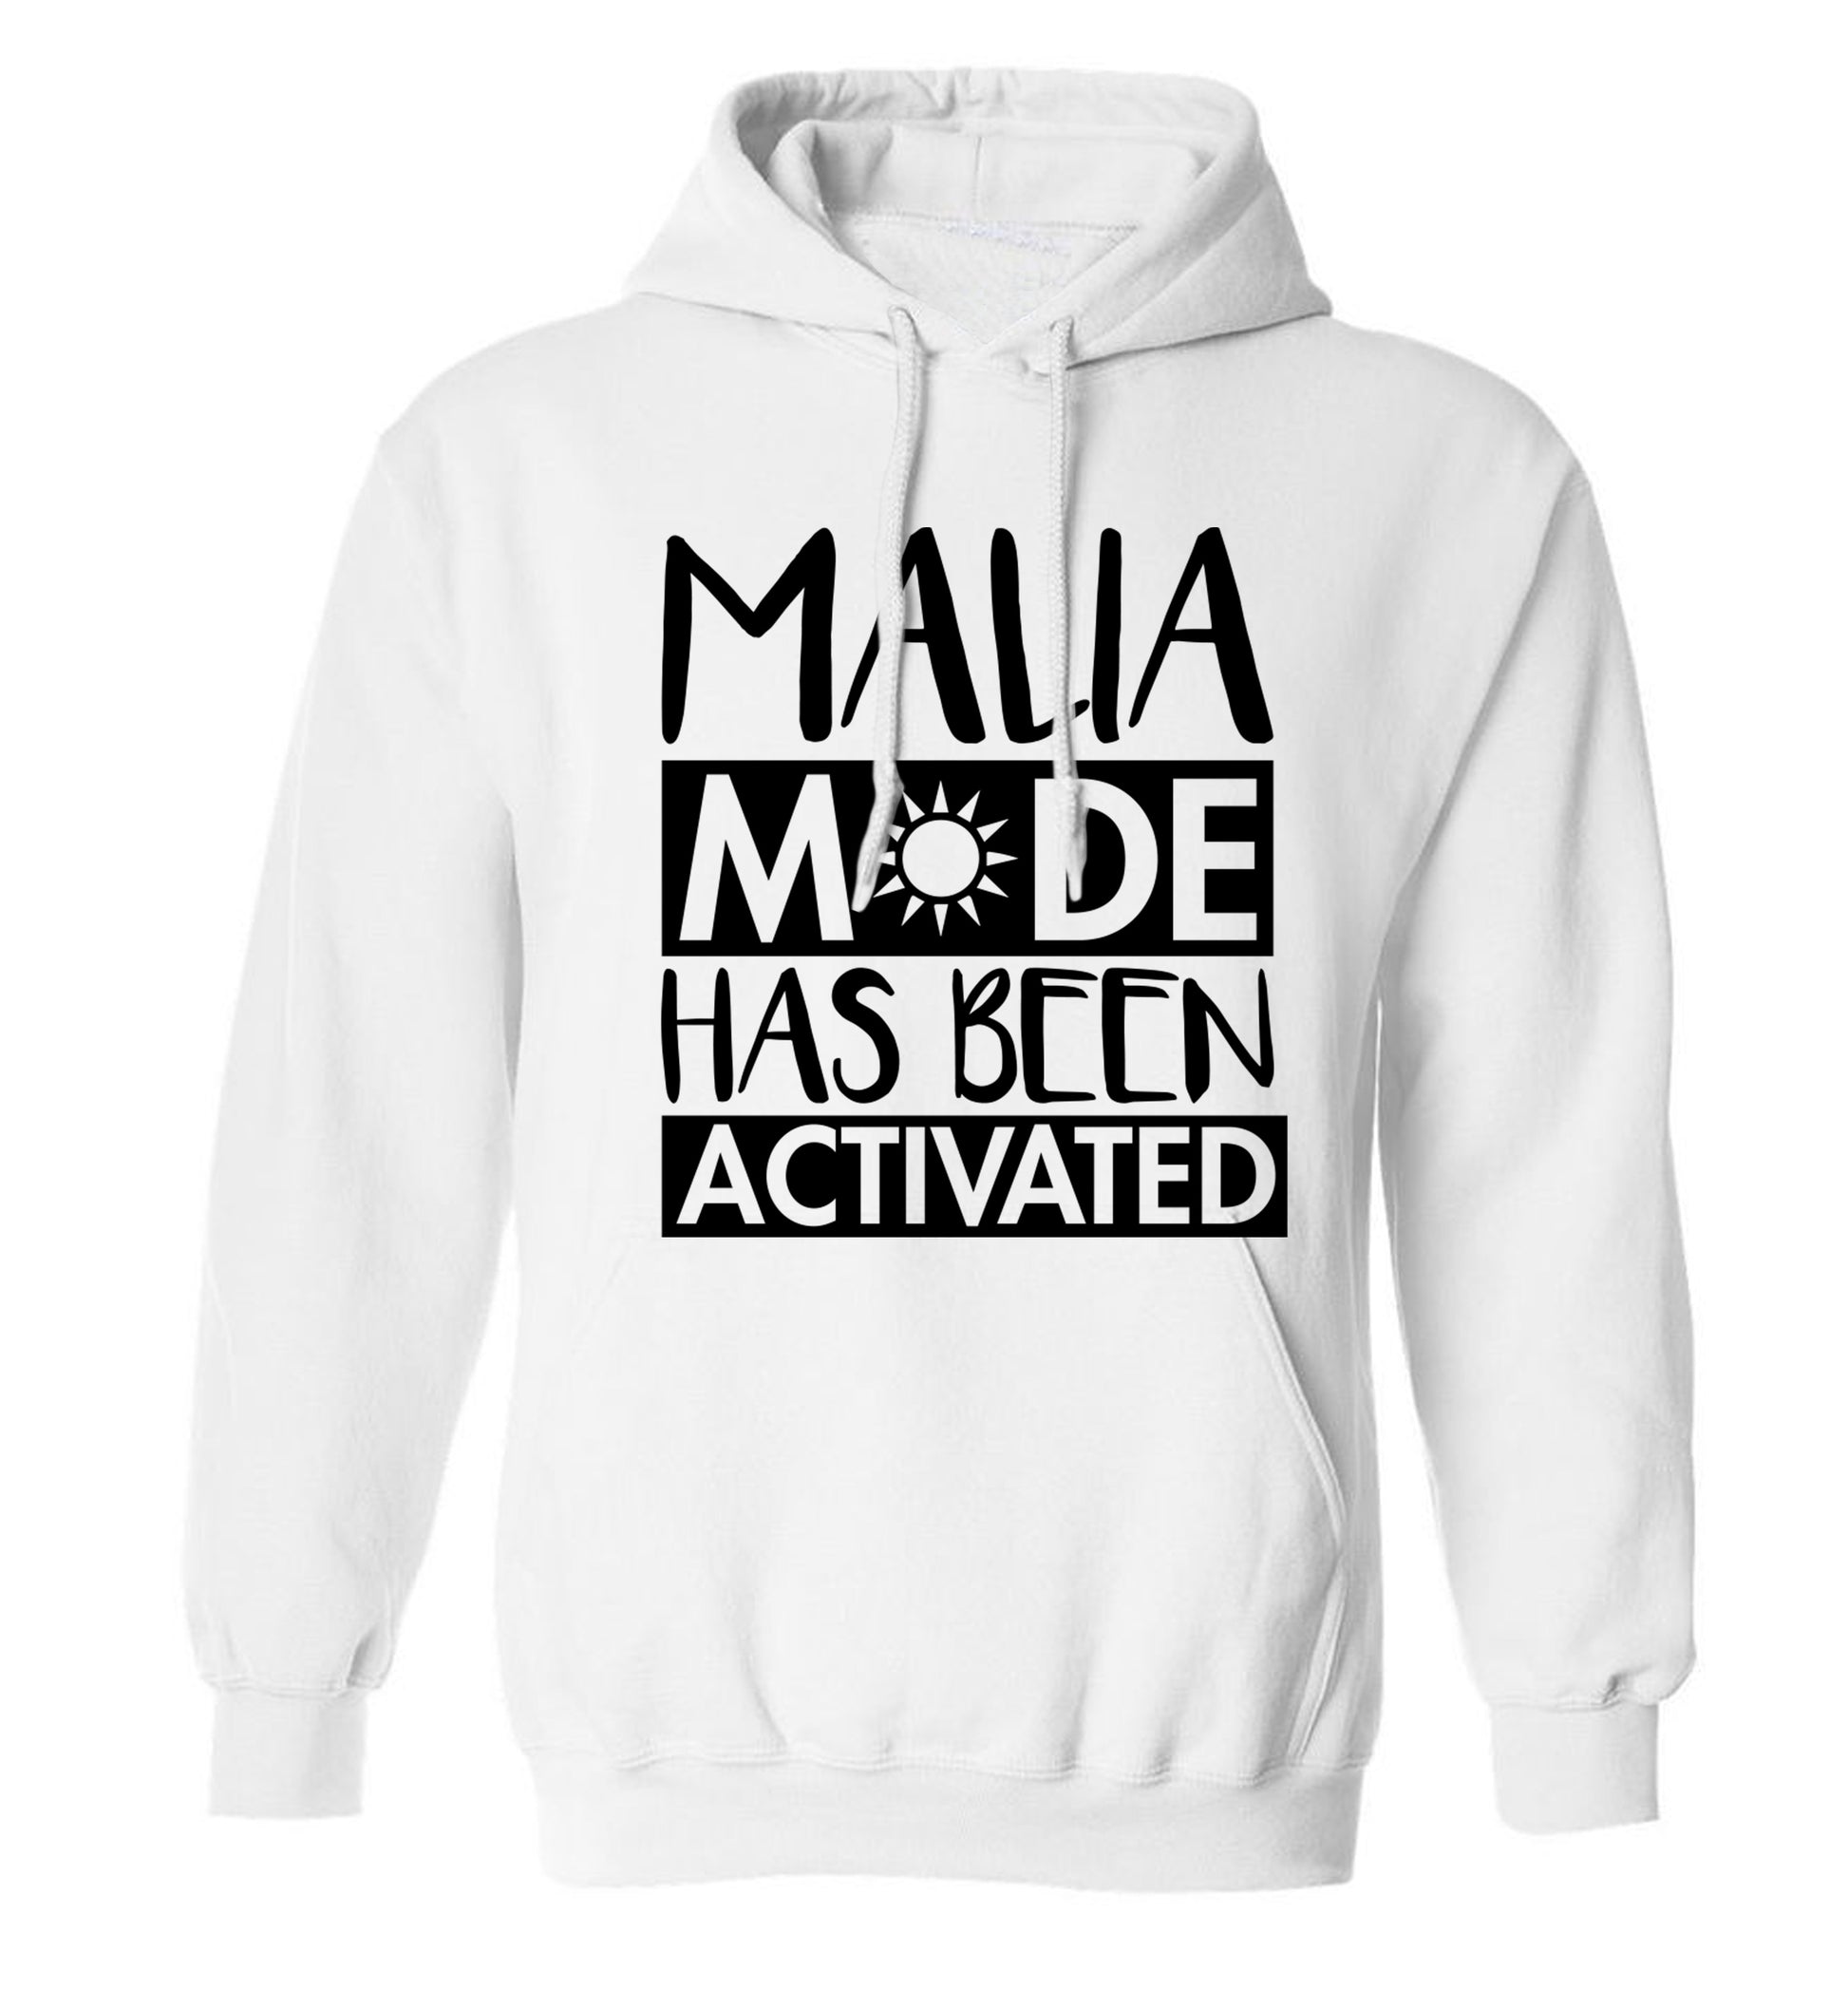 Malia mode has been activated adults unisex white hoodie 2XL